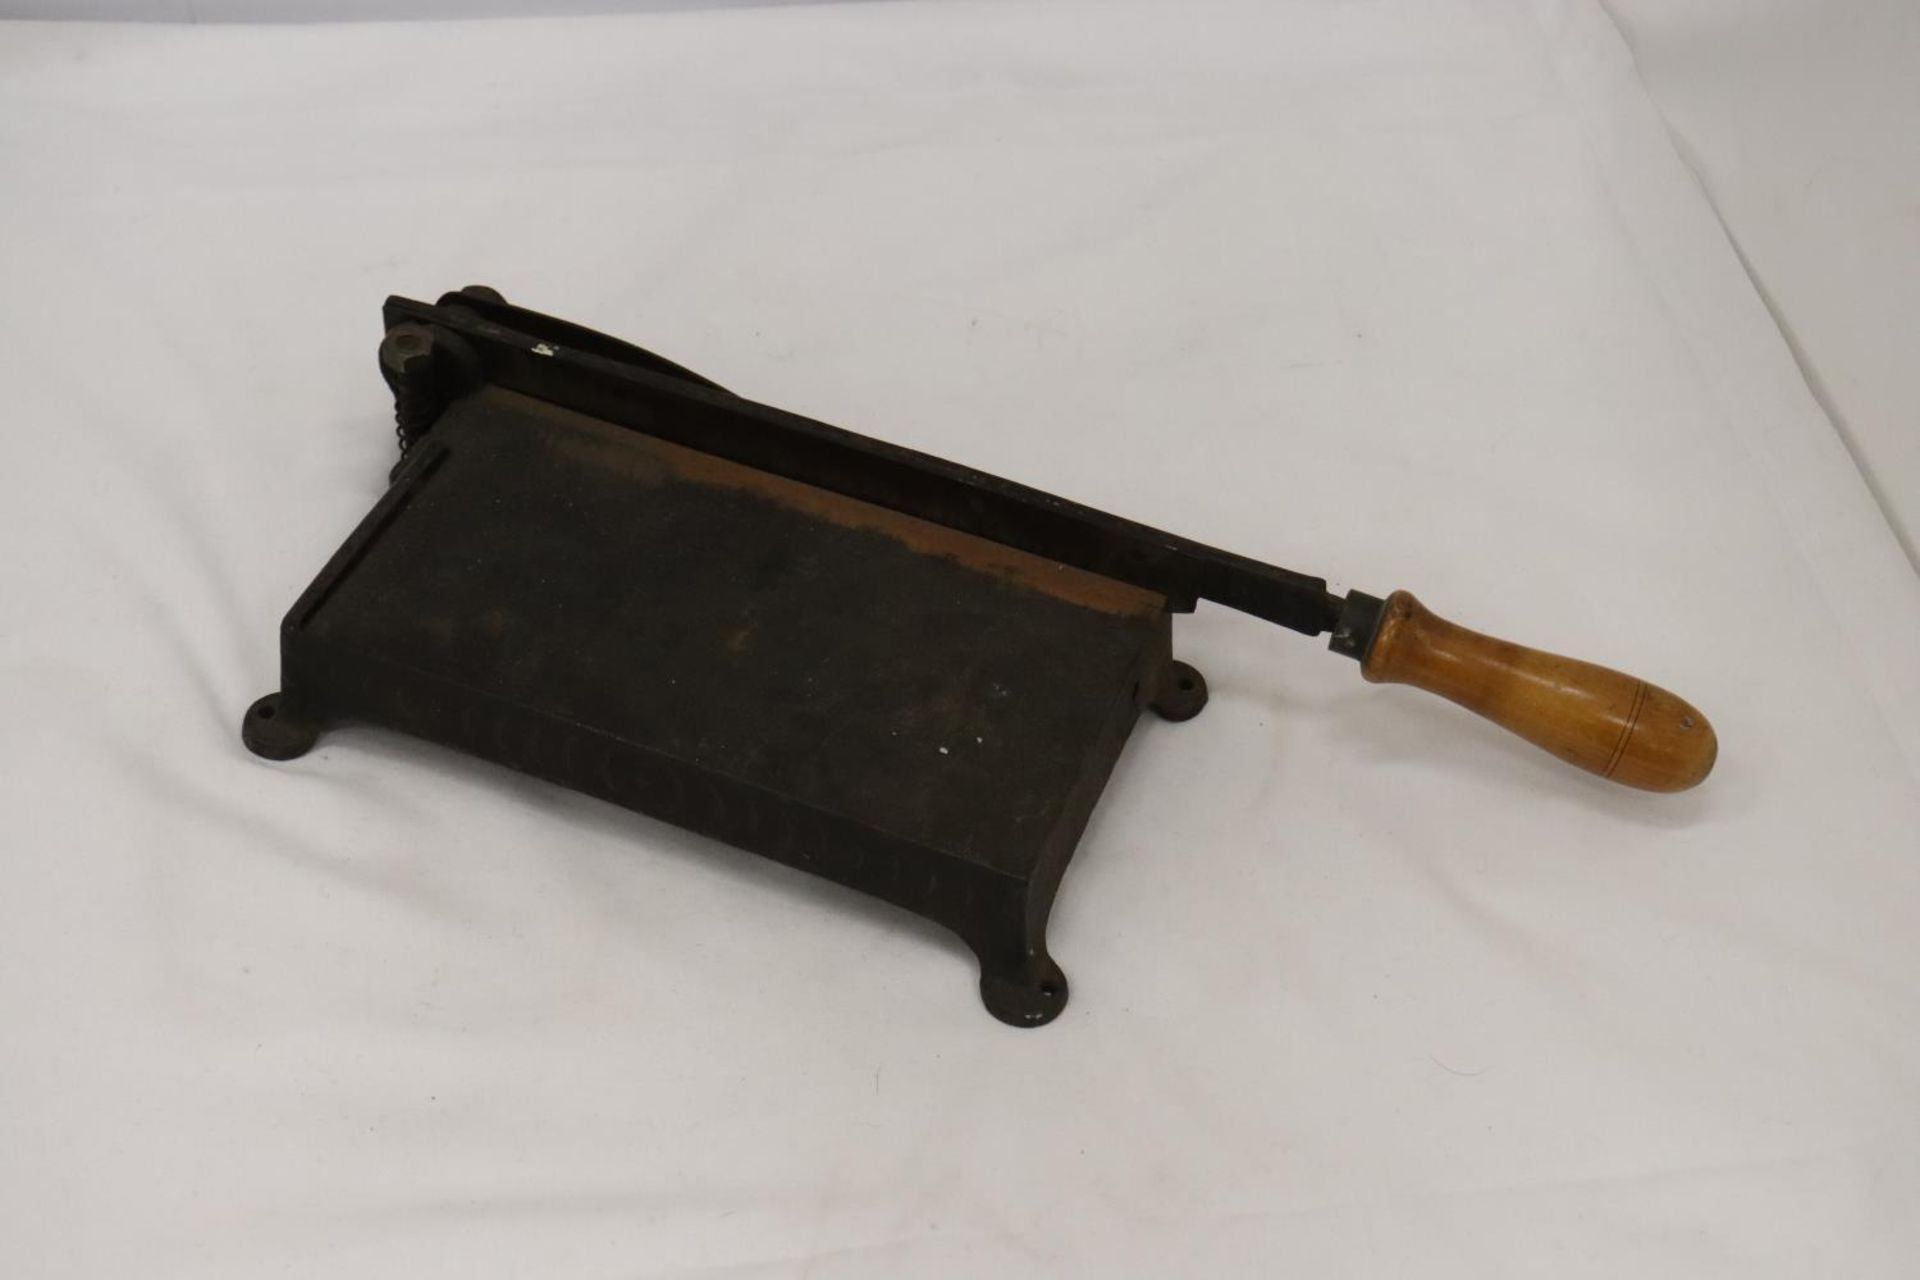 A VERY SHARP VINTAGE CAST GUILLOTINE - Image 3 of 7